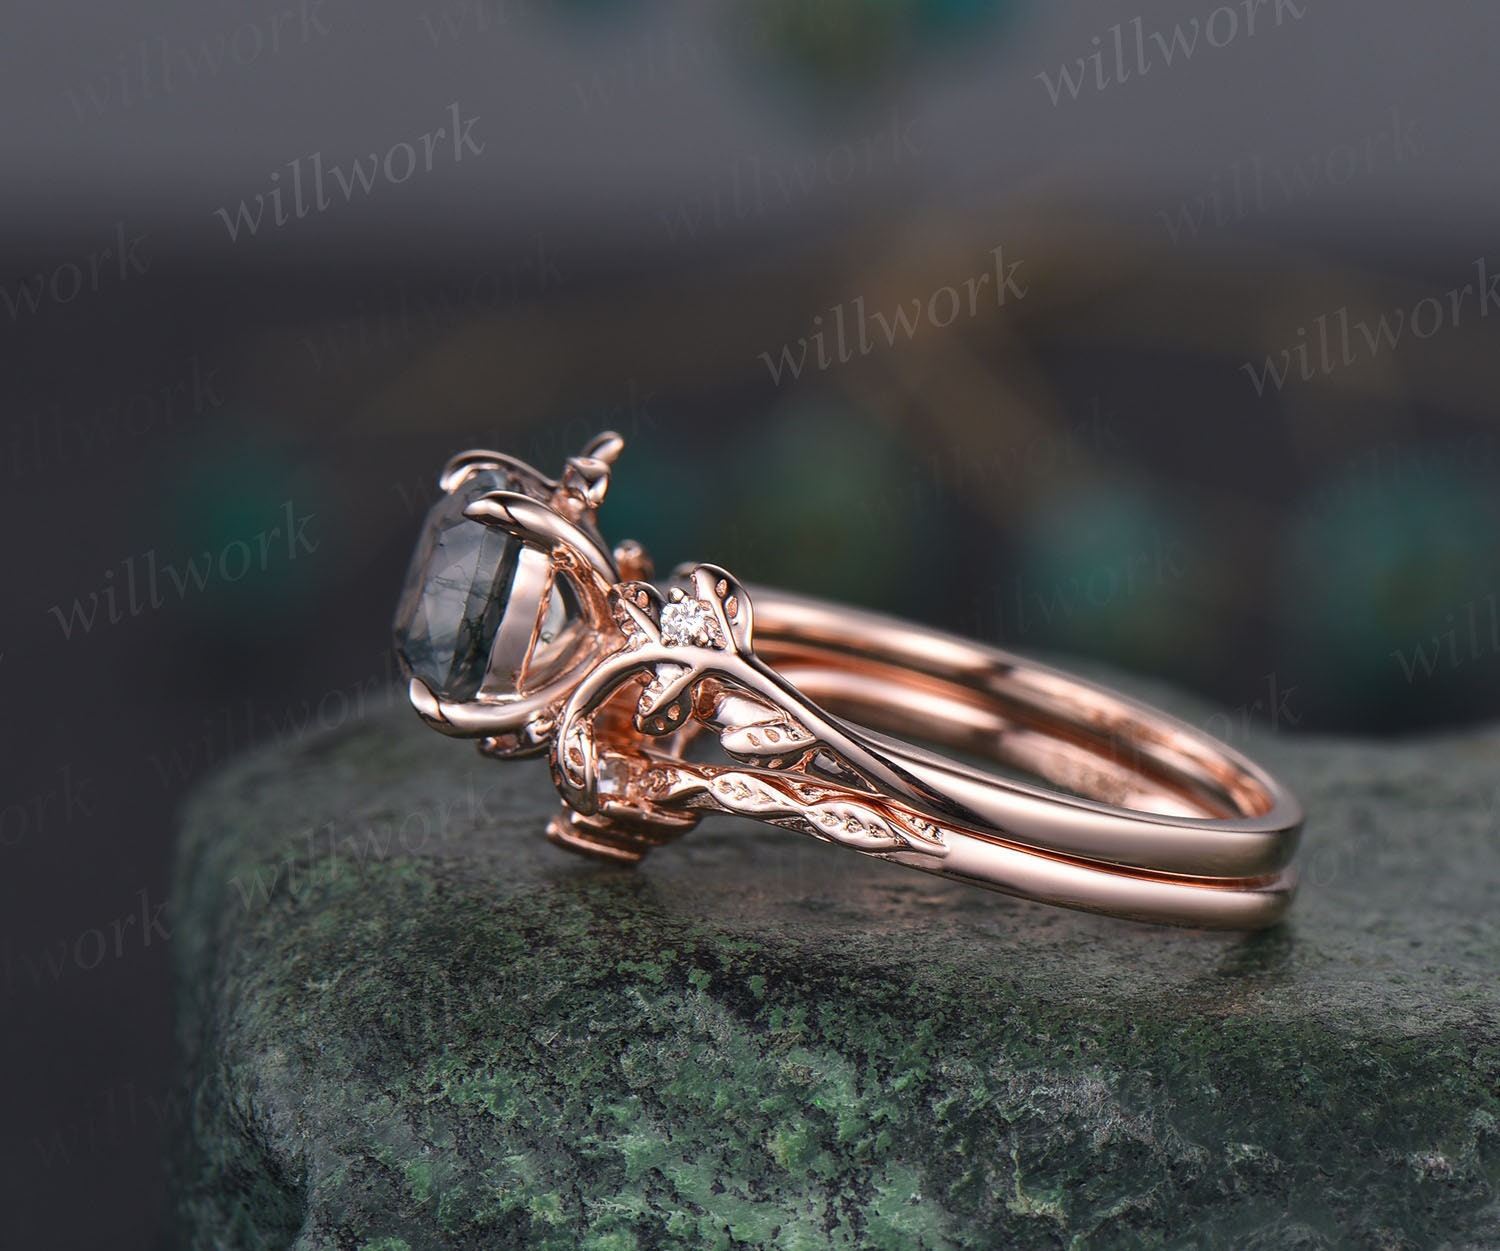 Manufacturer of Green stone ladies ring | Jewelxy - 97391